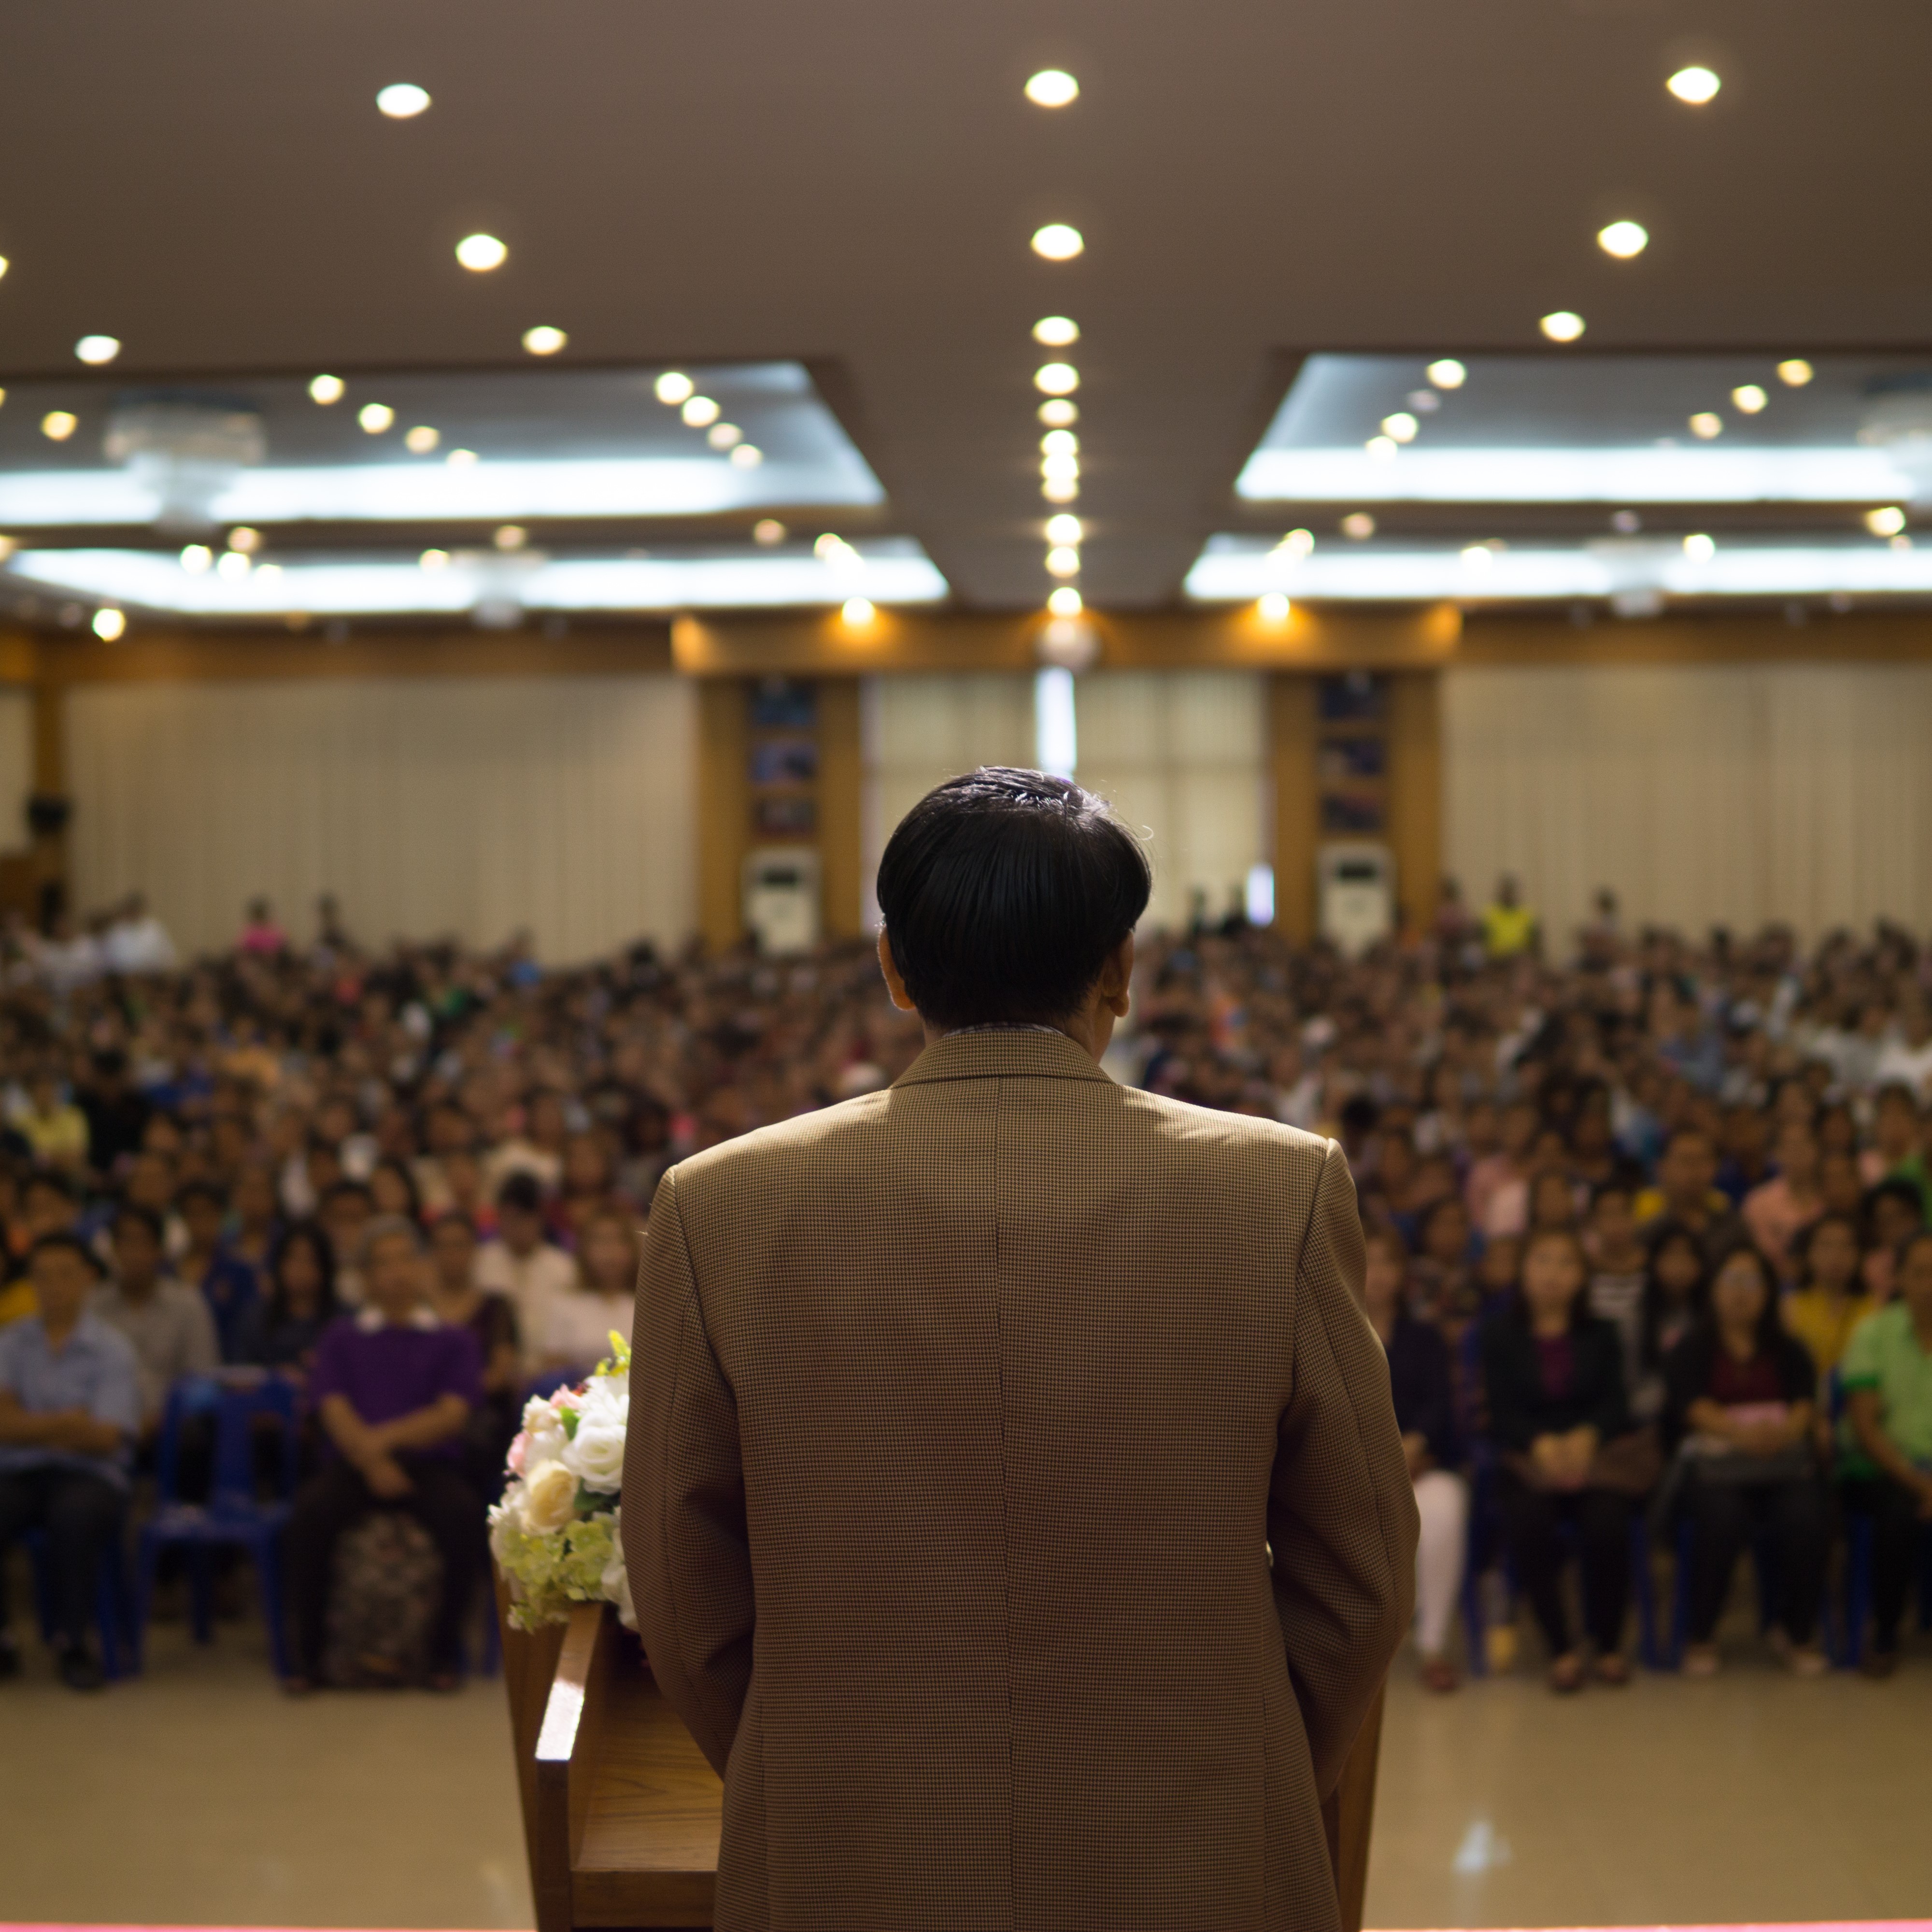 Stock image of back of man at podium speaking to an audience